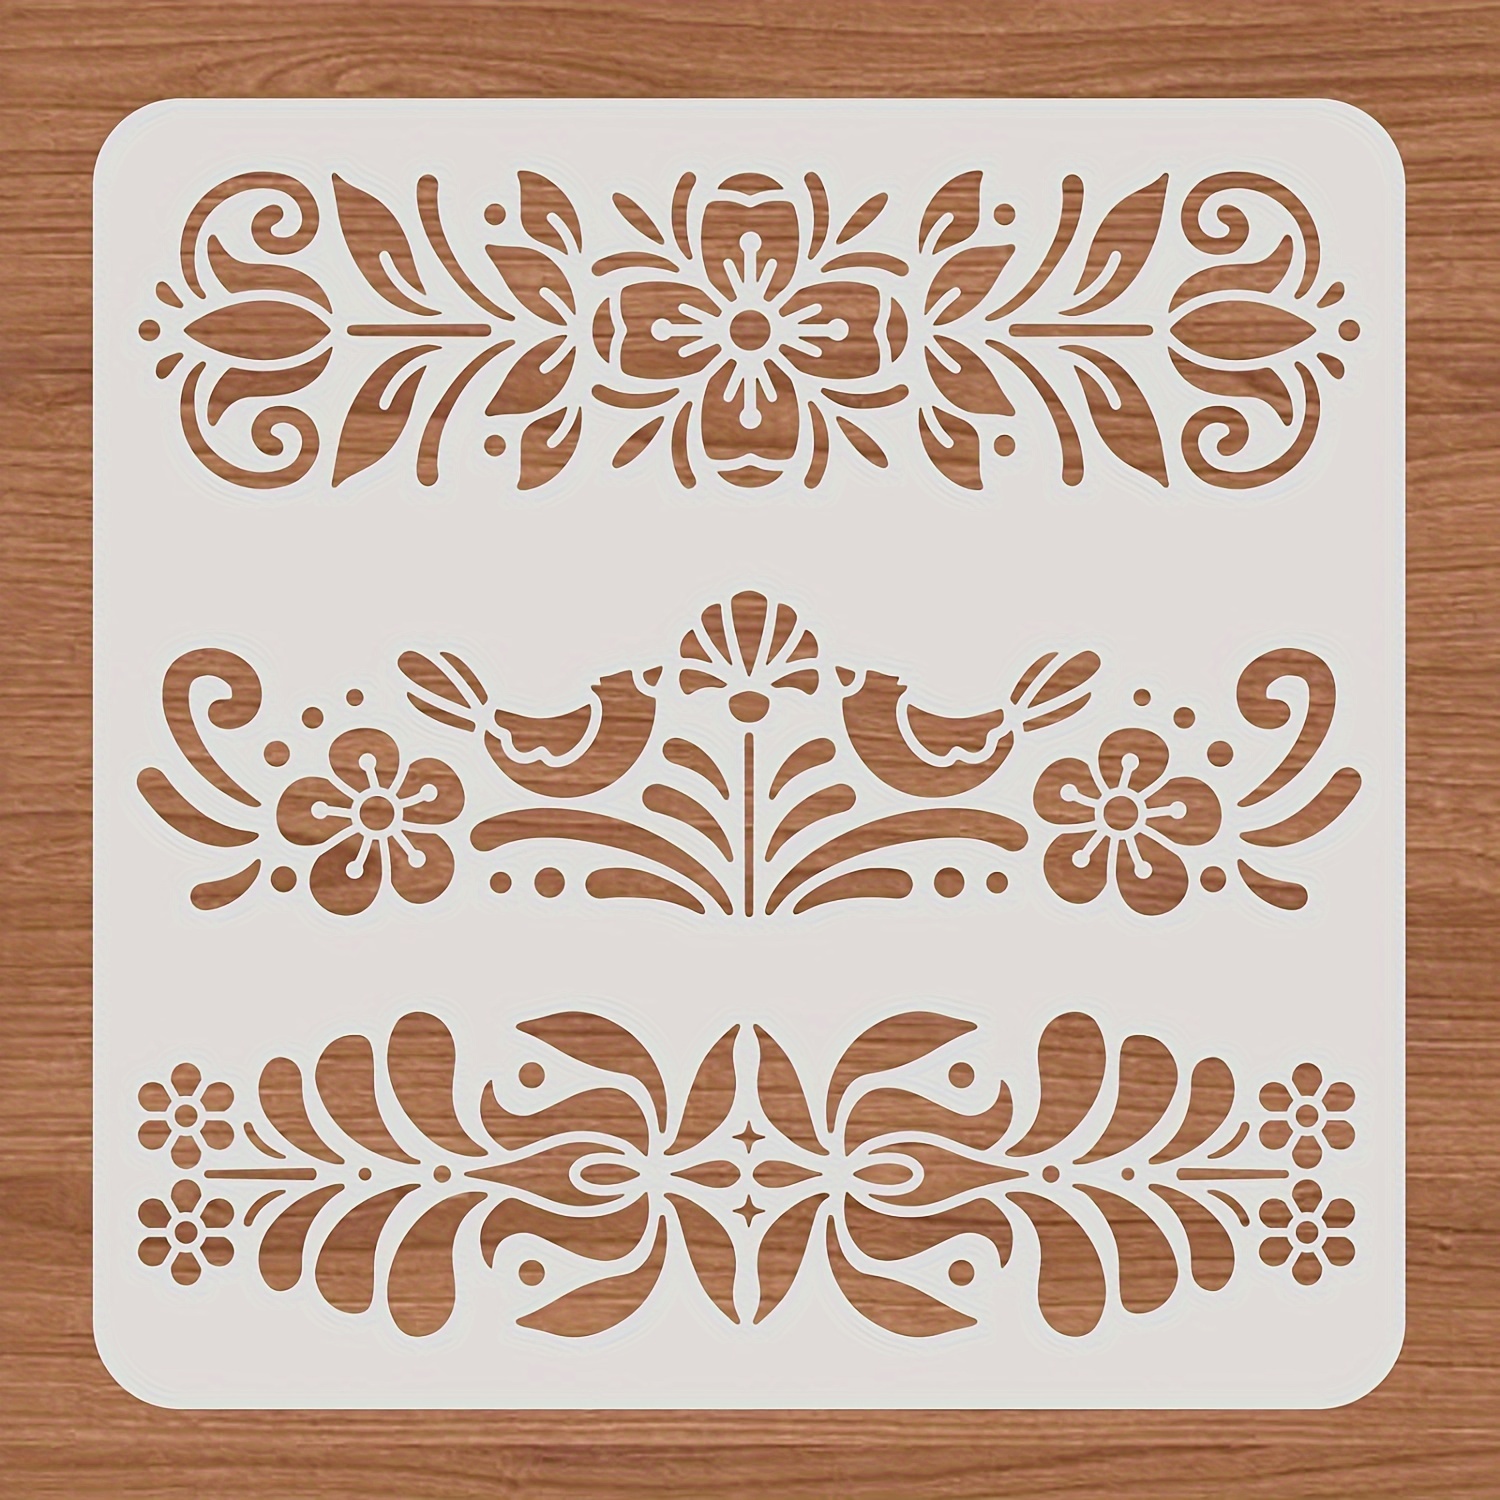 

Plastic Folk Decorative Painting Stencil Templates, Corner Stencils For Painting Flowe 12x12inch Floral Pattern Scandinavian Style Reusable Drawing Stencils For Diy Art Craft Wall Canvas Furniture